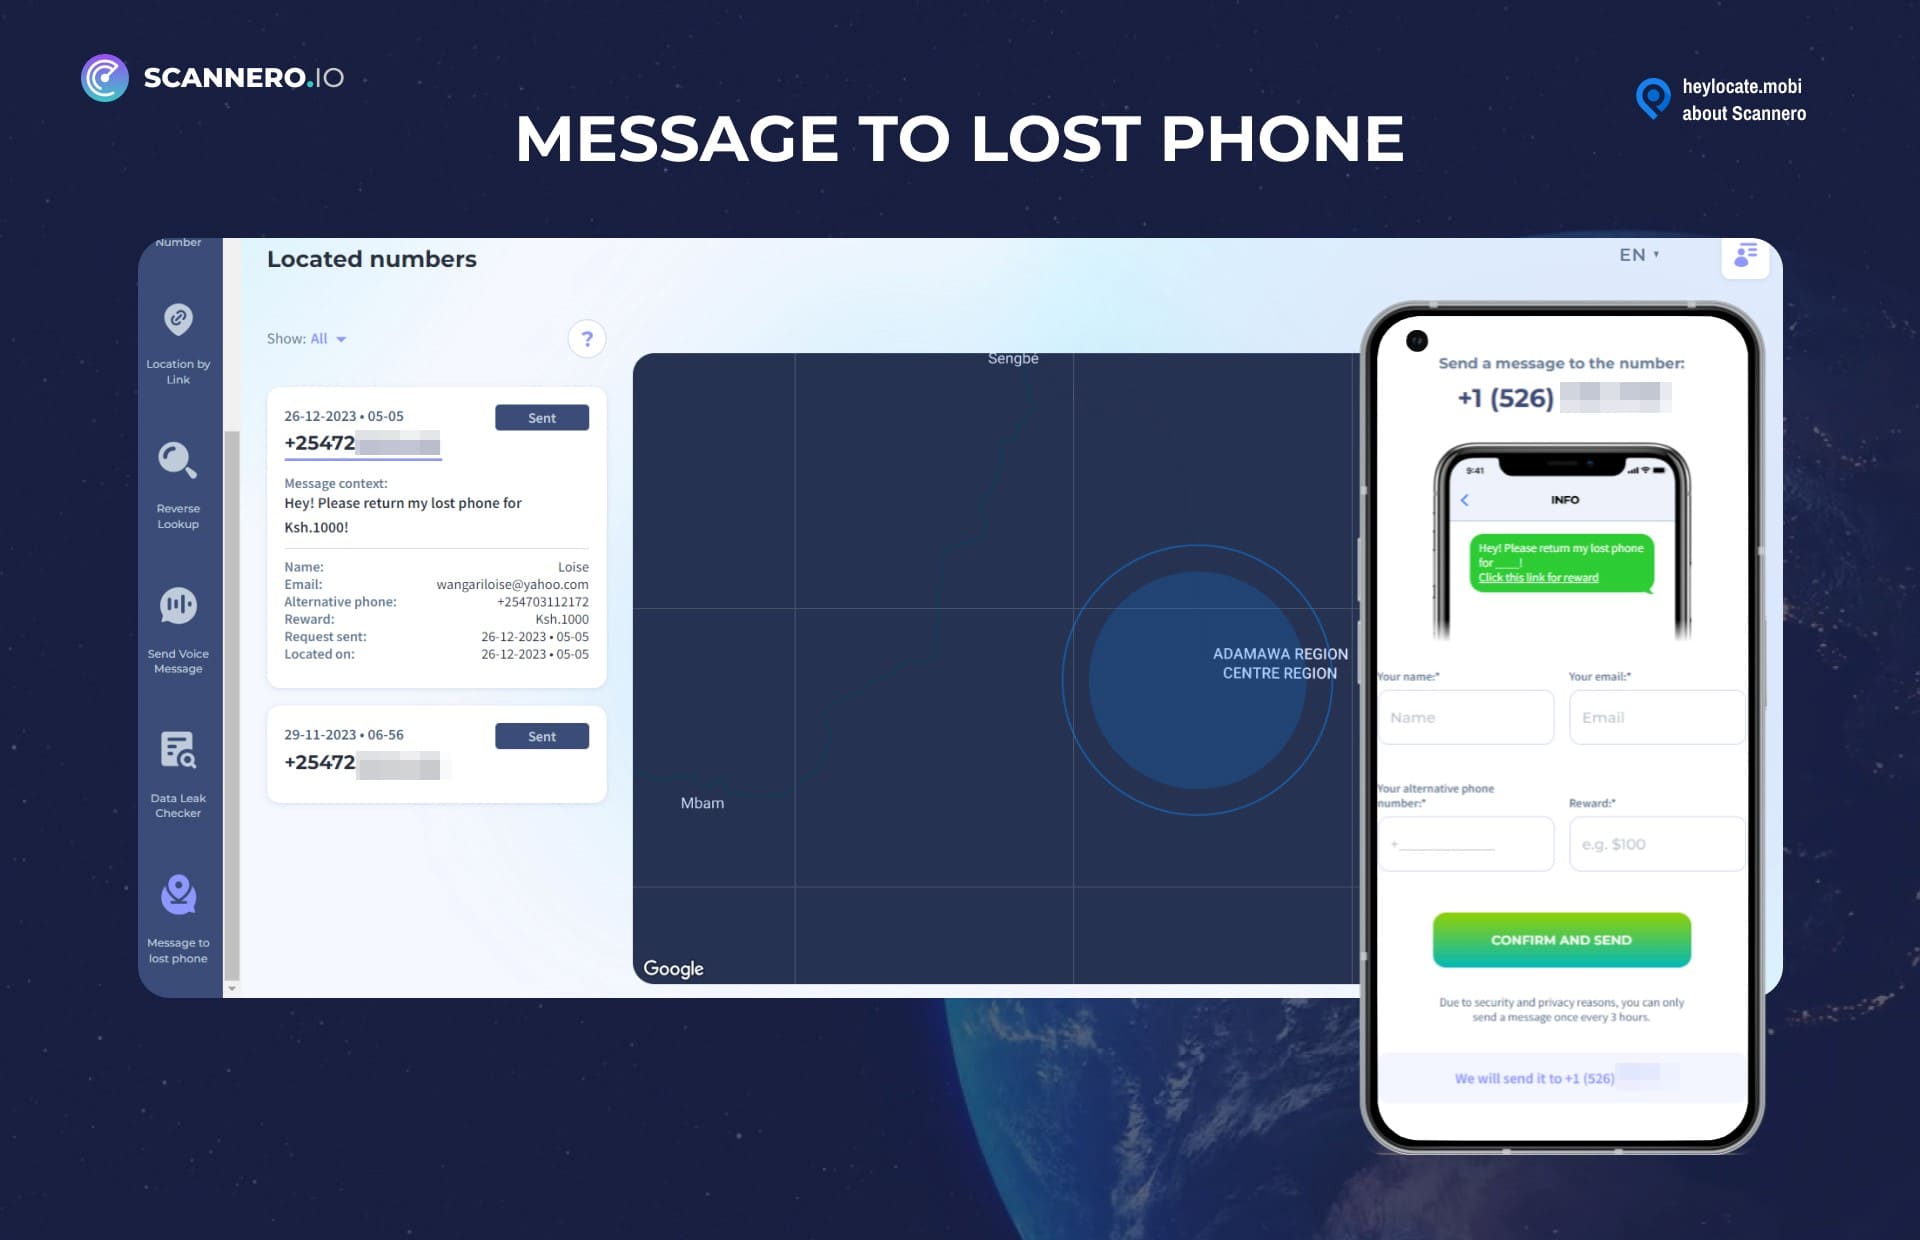 Interface showcasing the 'Message to Lost Phone' feature on Scannero.io with a list of located numbers and a message composition window for contacting the finder of a lost phone.